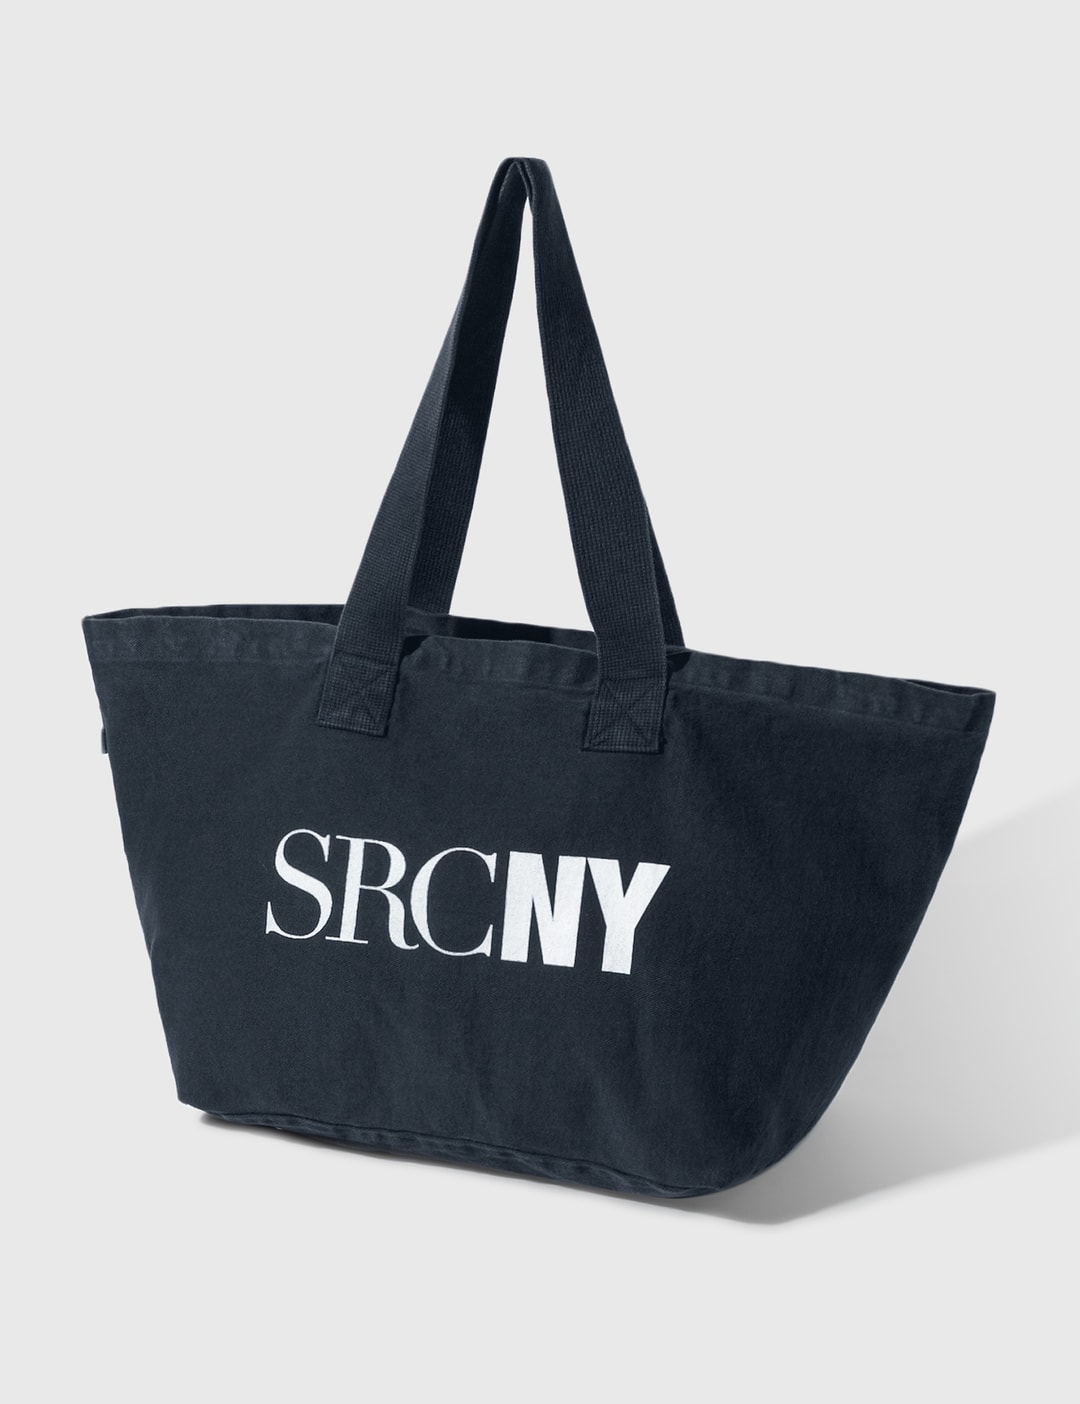 Sporty & Rich - SRCNY Tote Bag | HBX - Globally Curated Fashion and ...